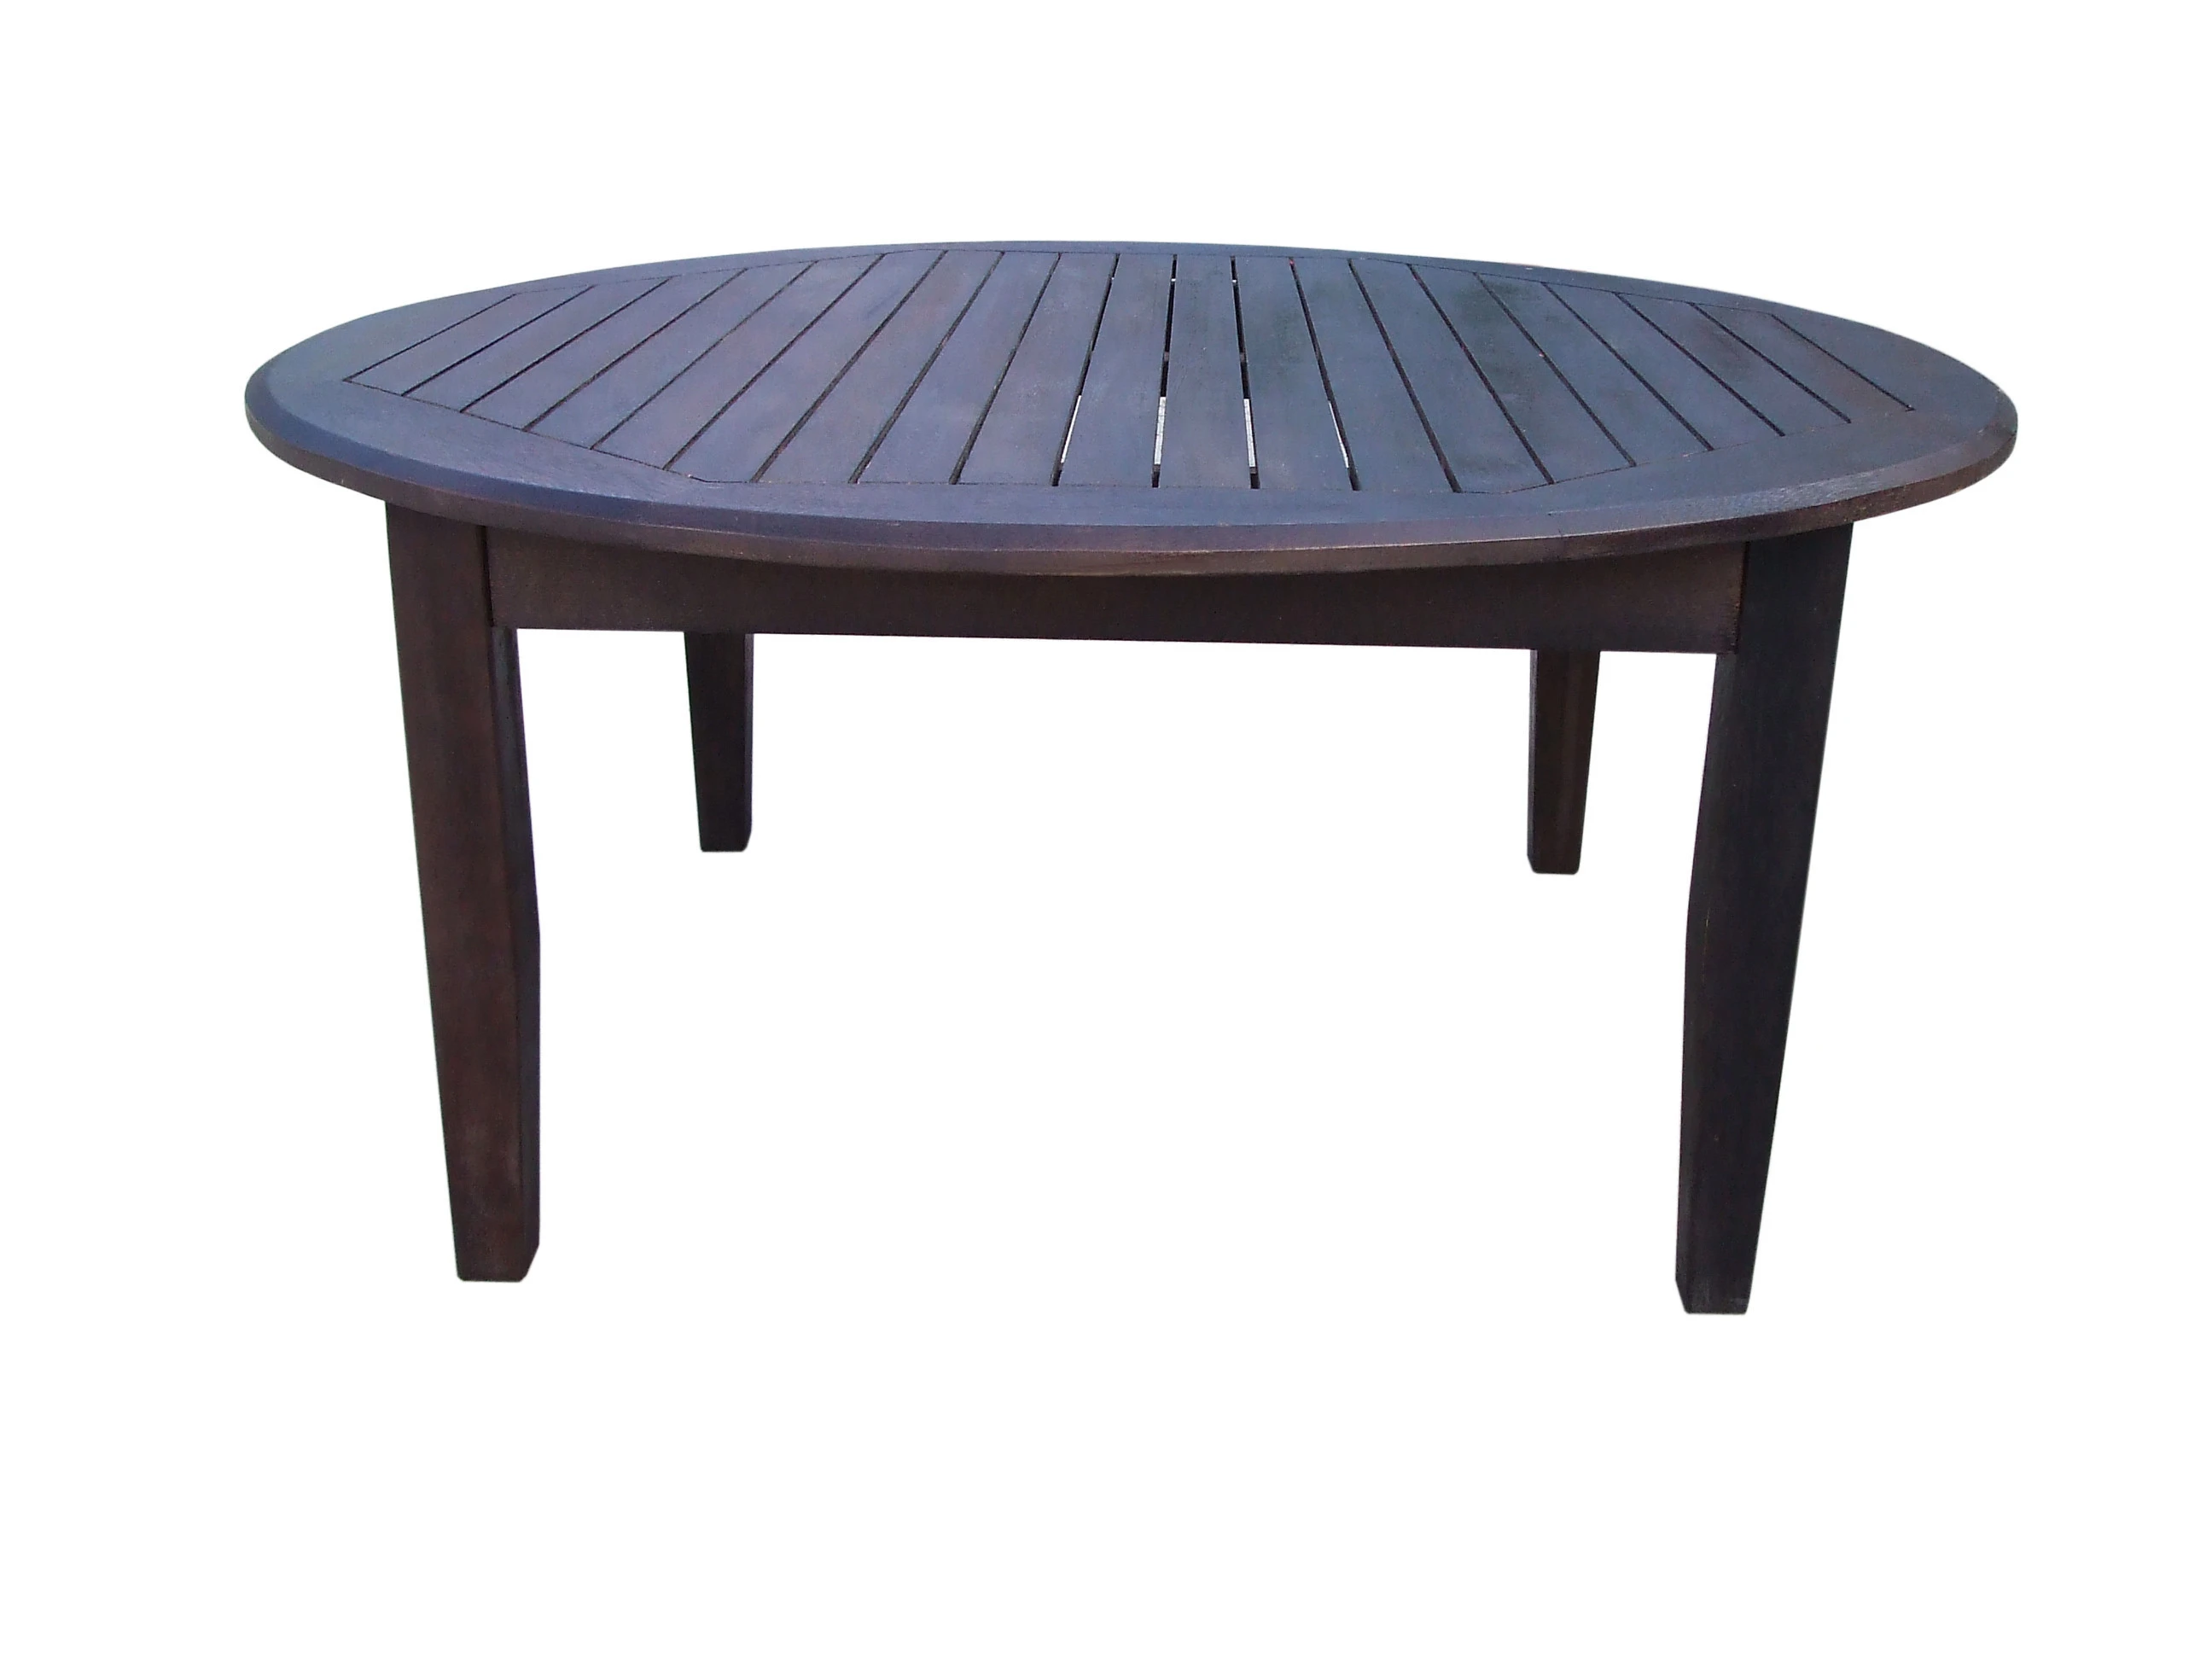 FOLDING TABLE FACTORY DIRECT PRICE FROM VIETNAM  OUTDOOR FURNITURE WOODEN GARDEN DECORATION WHOLESALE NEW DESIGN